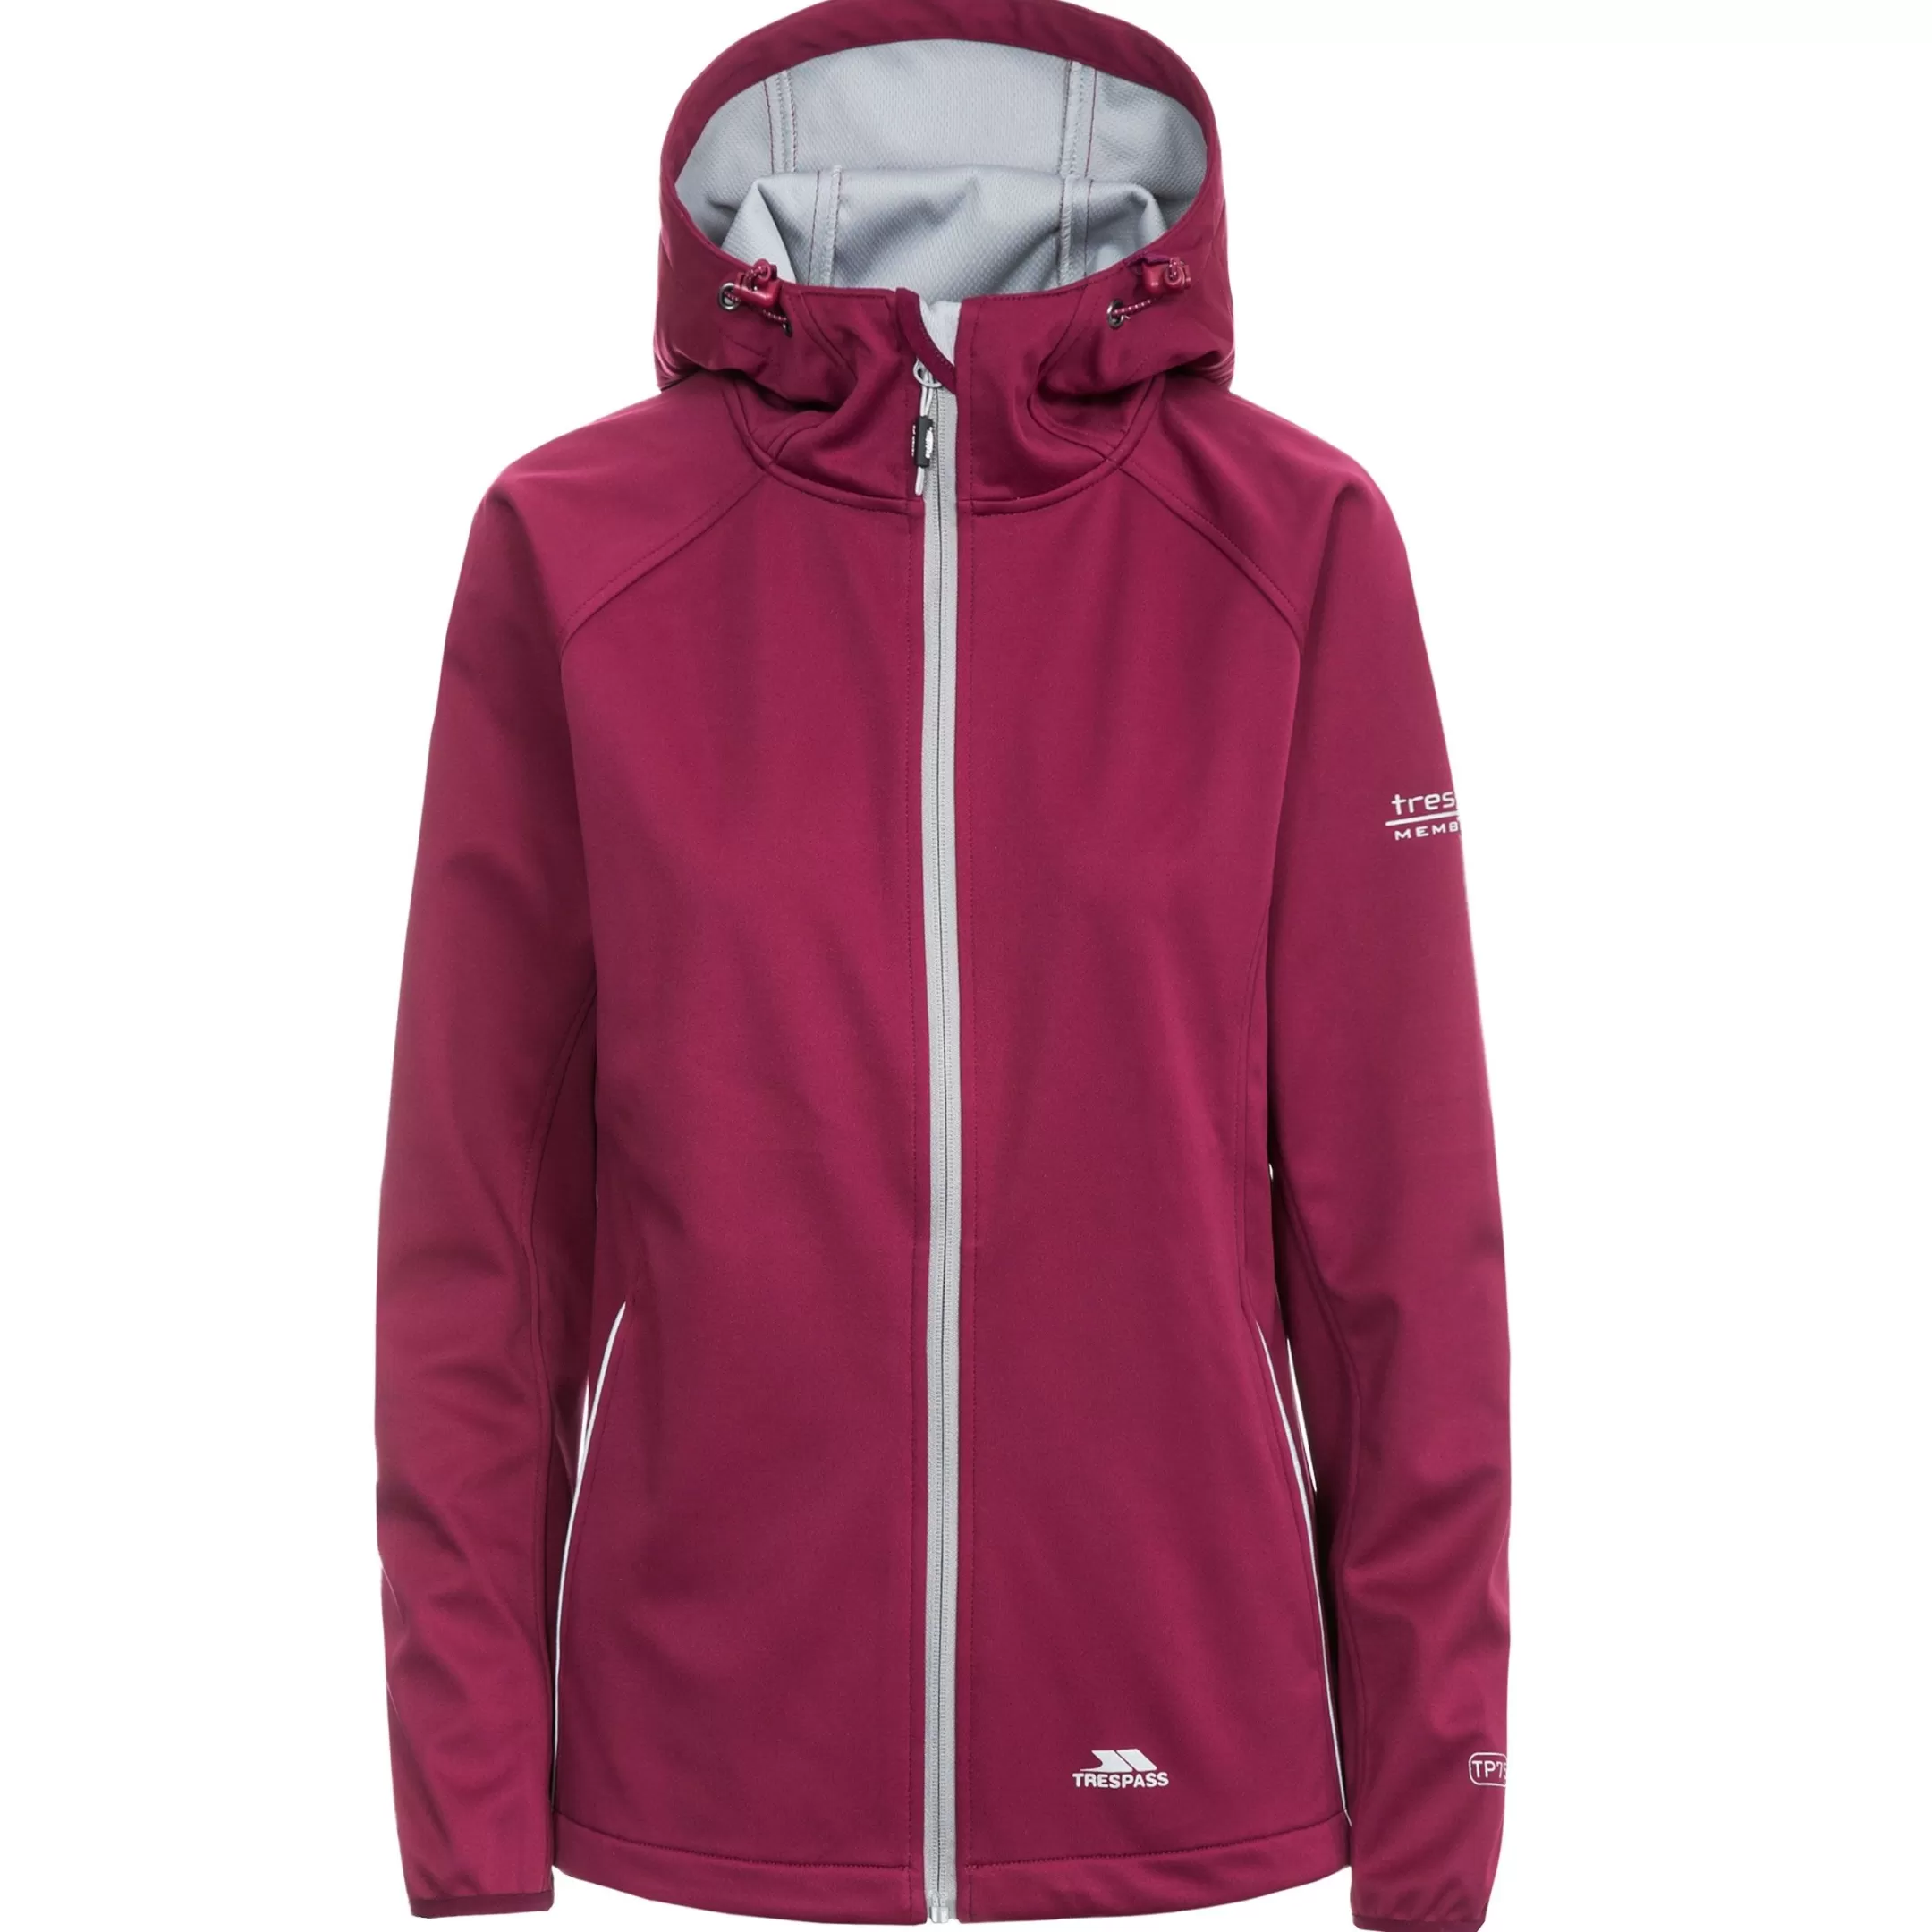 Womens Hooded Softshell Jacket Sisely | Trespass Flash Sale